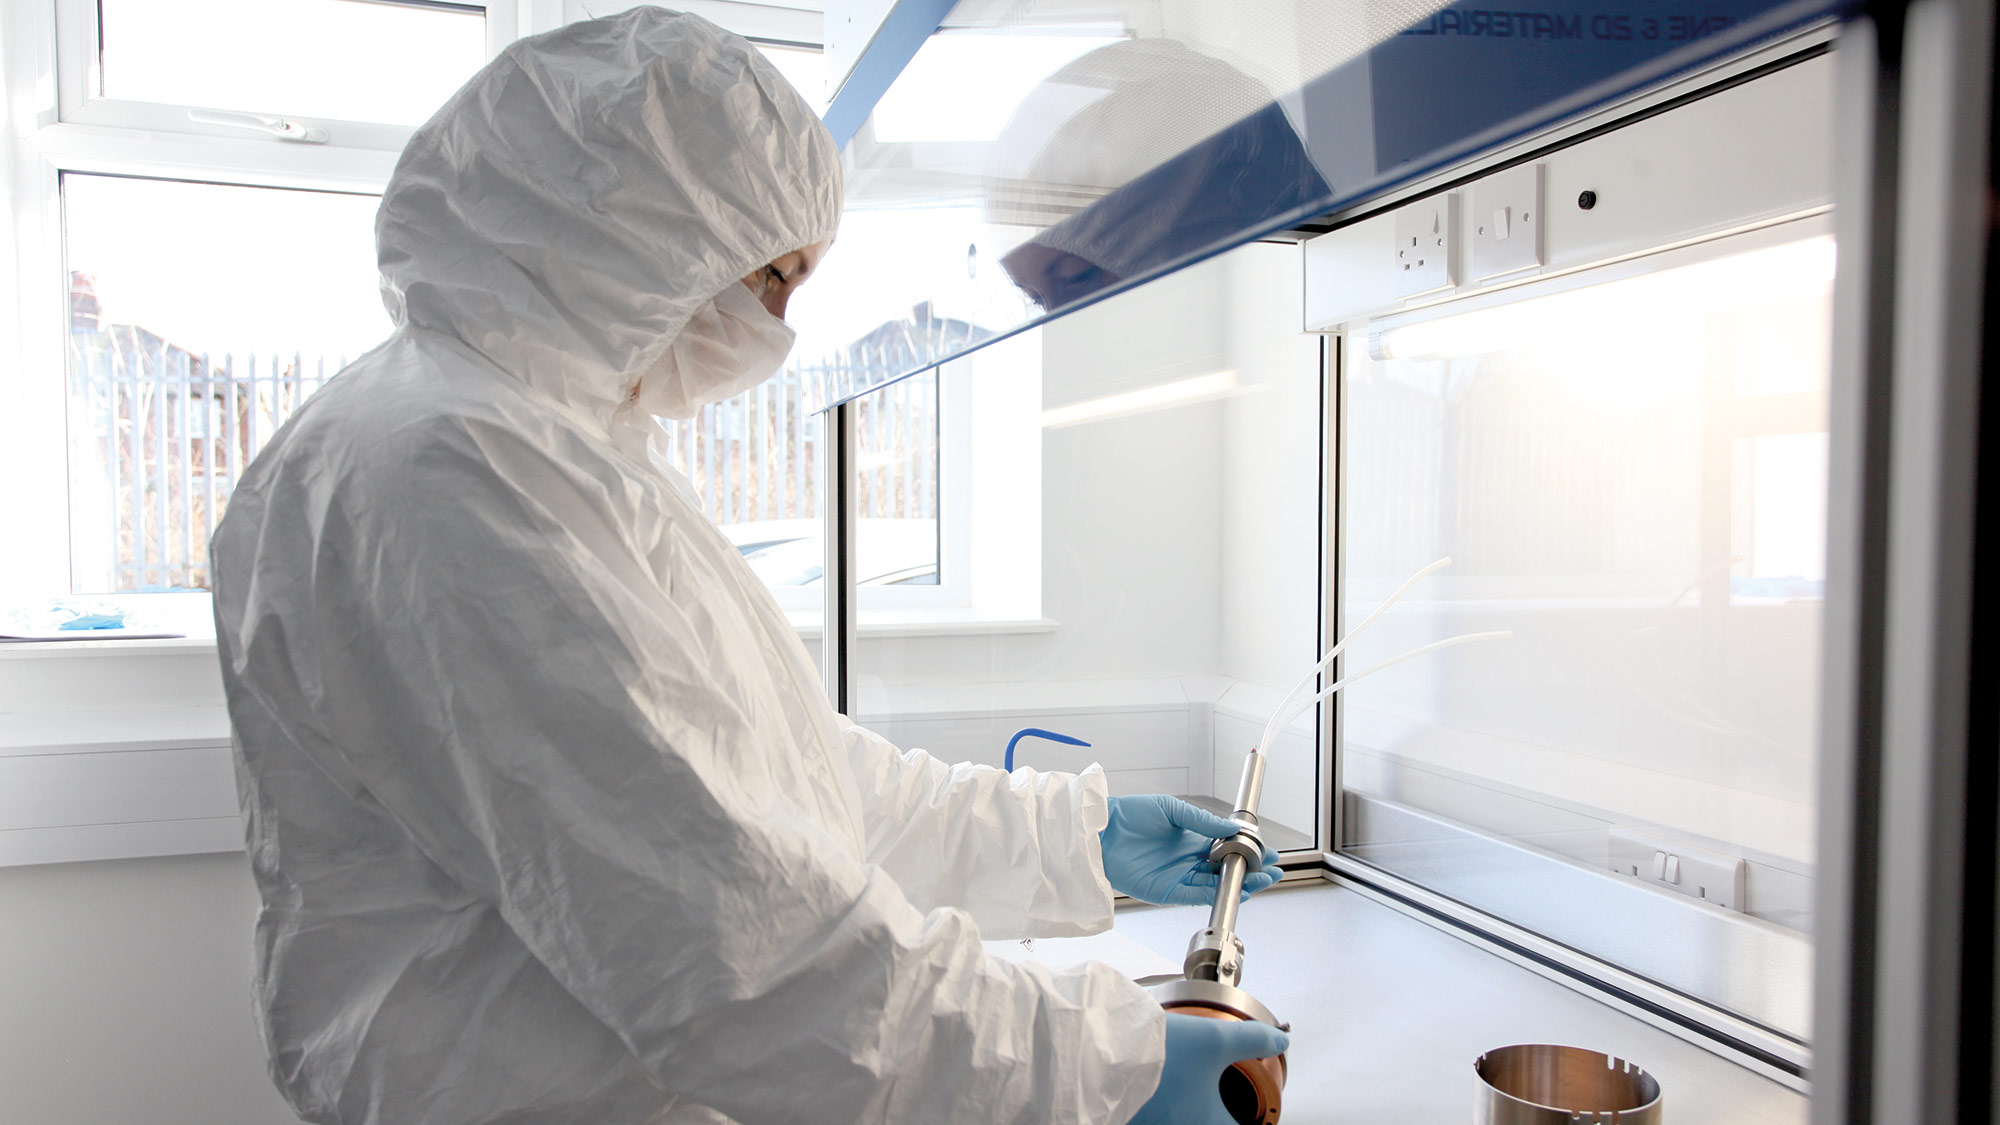 Photo of a person wearing a clean hood in a laboratory environment - Integrity Cleanroom